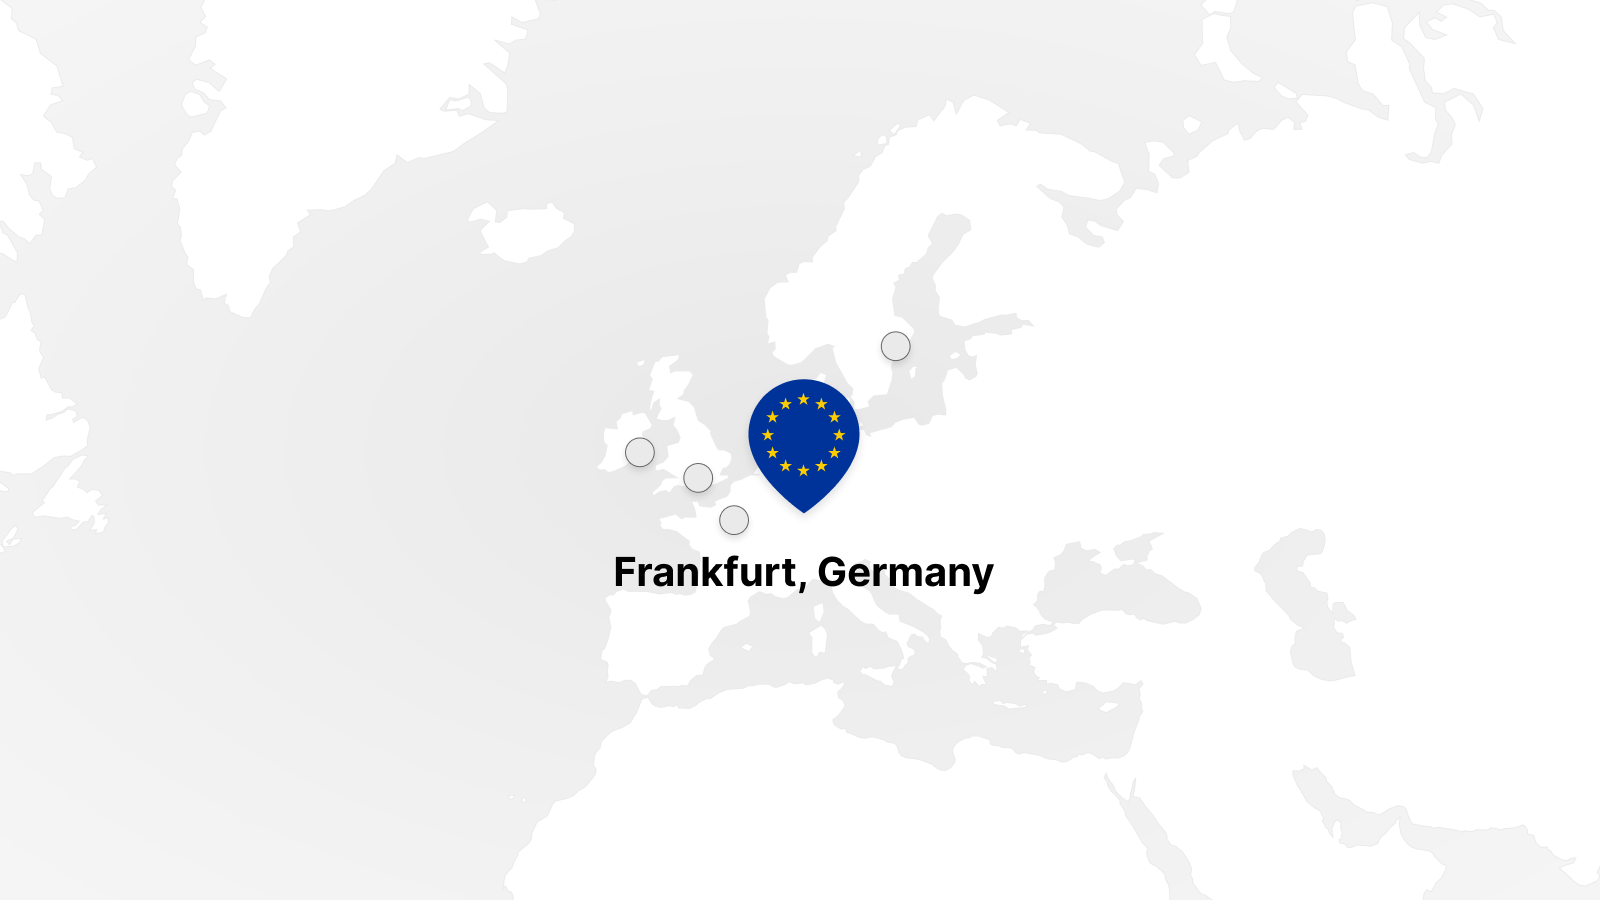 Cover for "Frankfurt (Germany) is now available on the Edge Network"